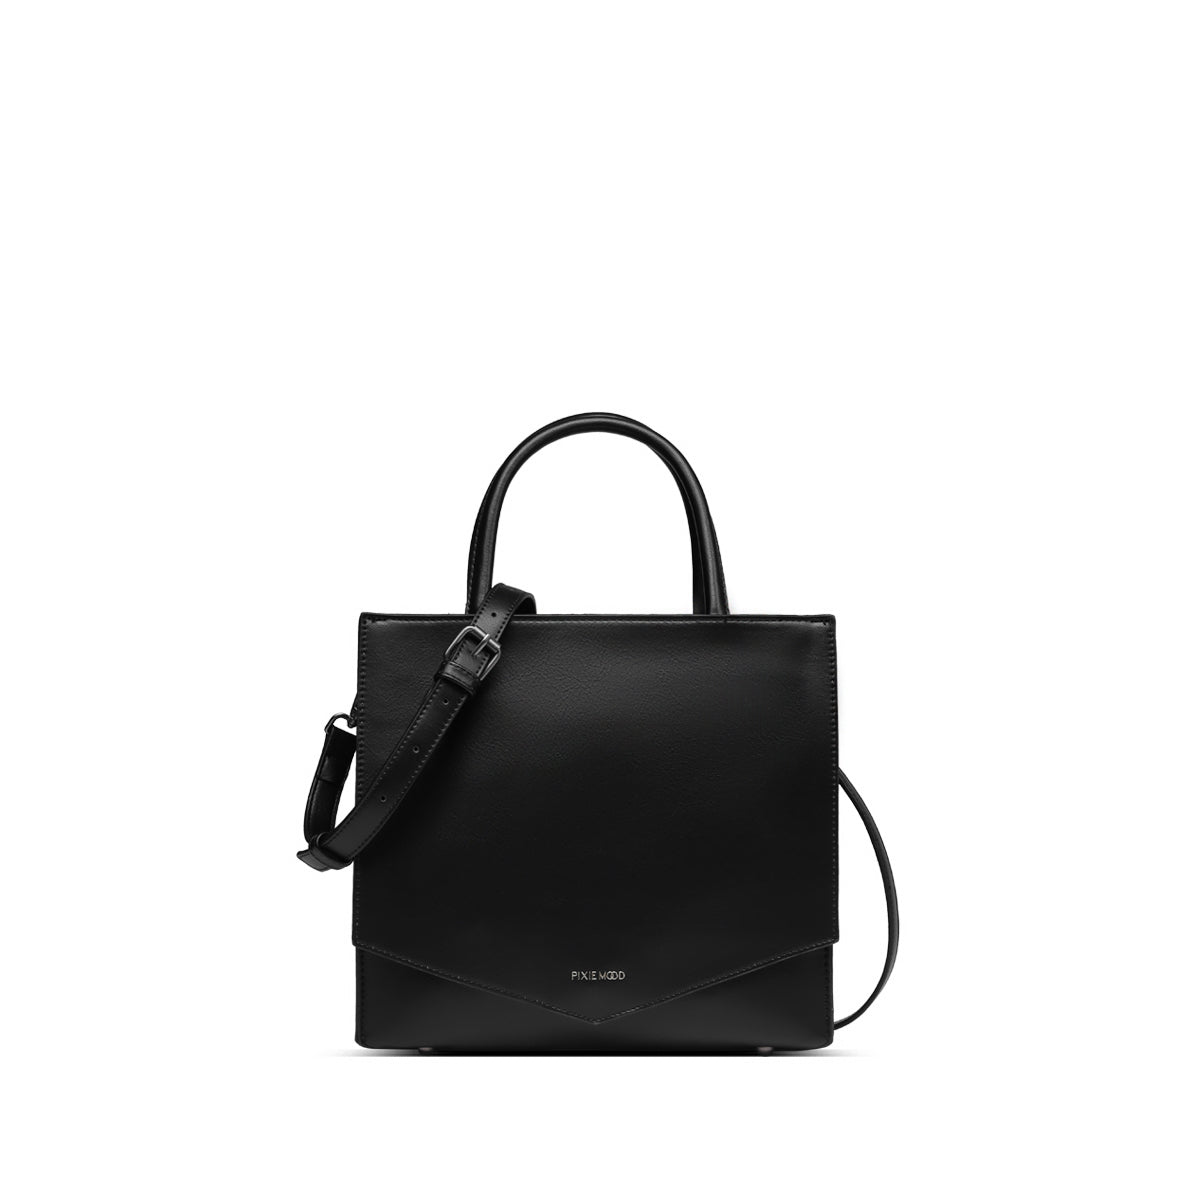 Caitlin Small Recycled Vegan Leather Tote